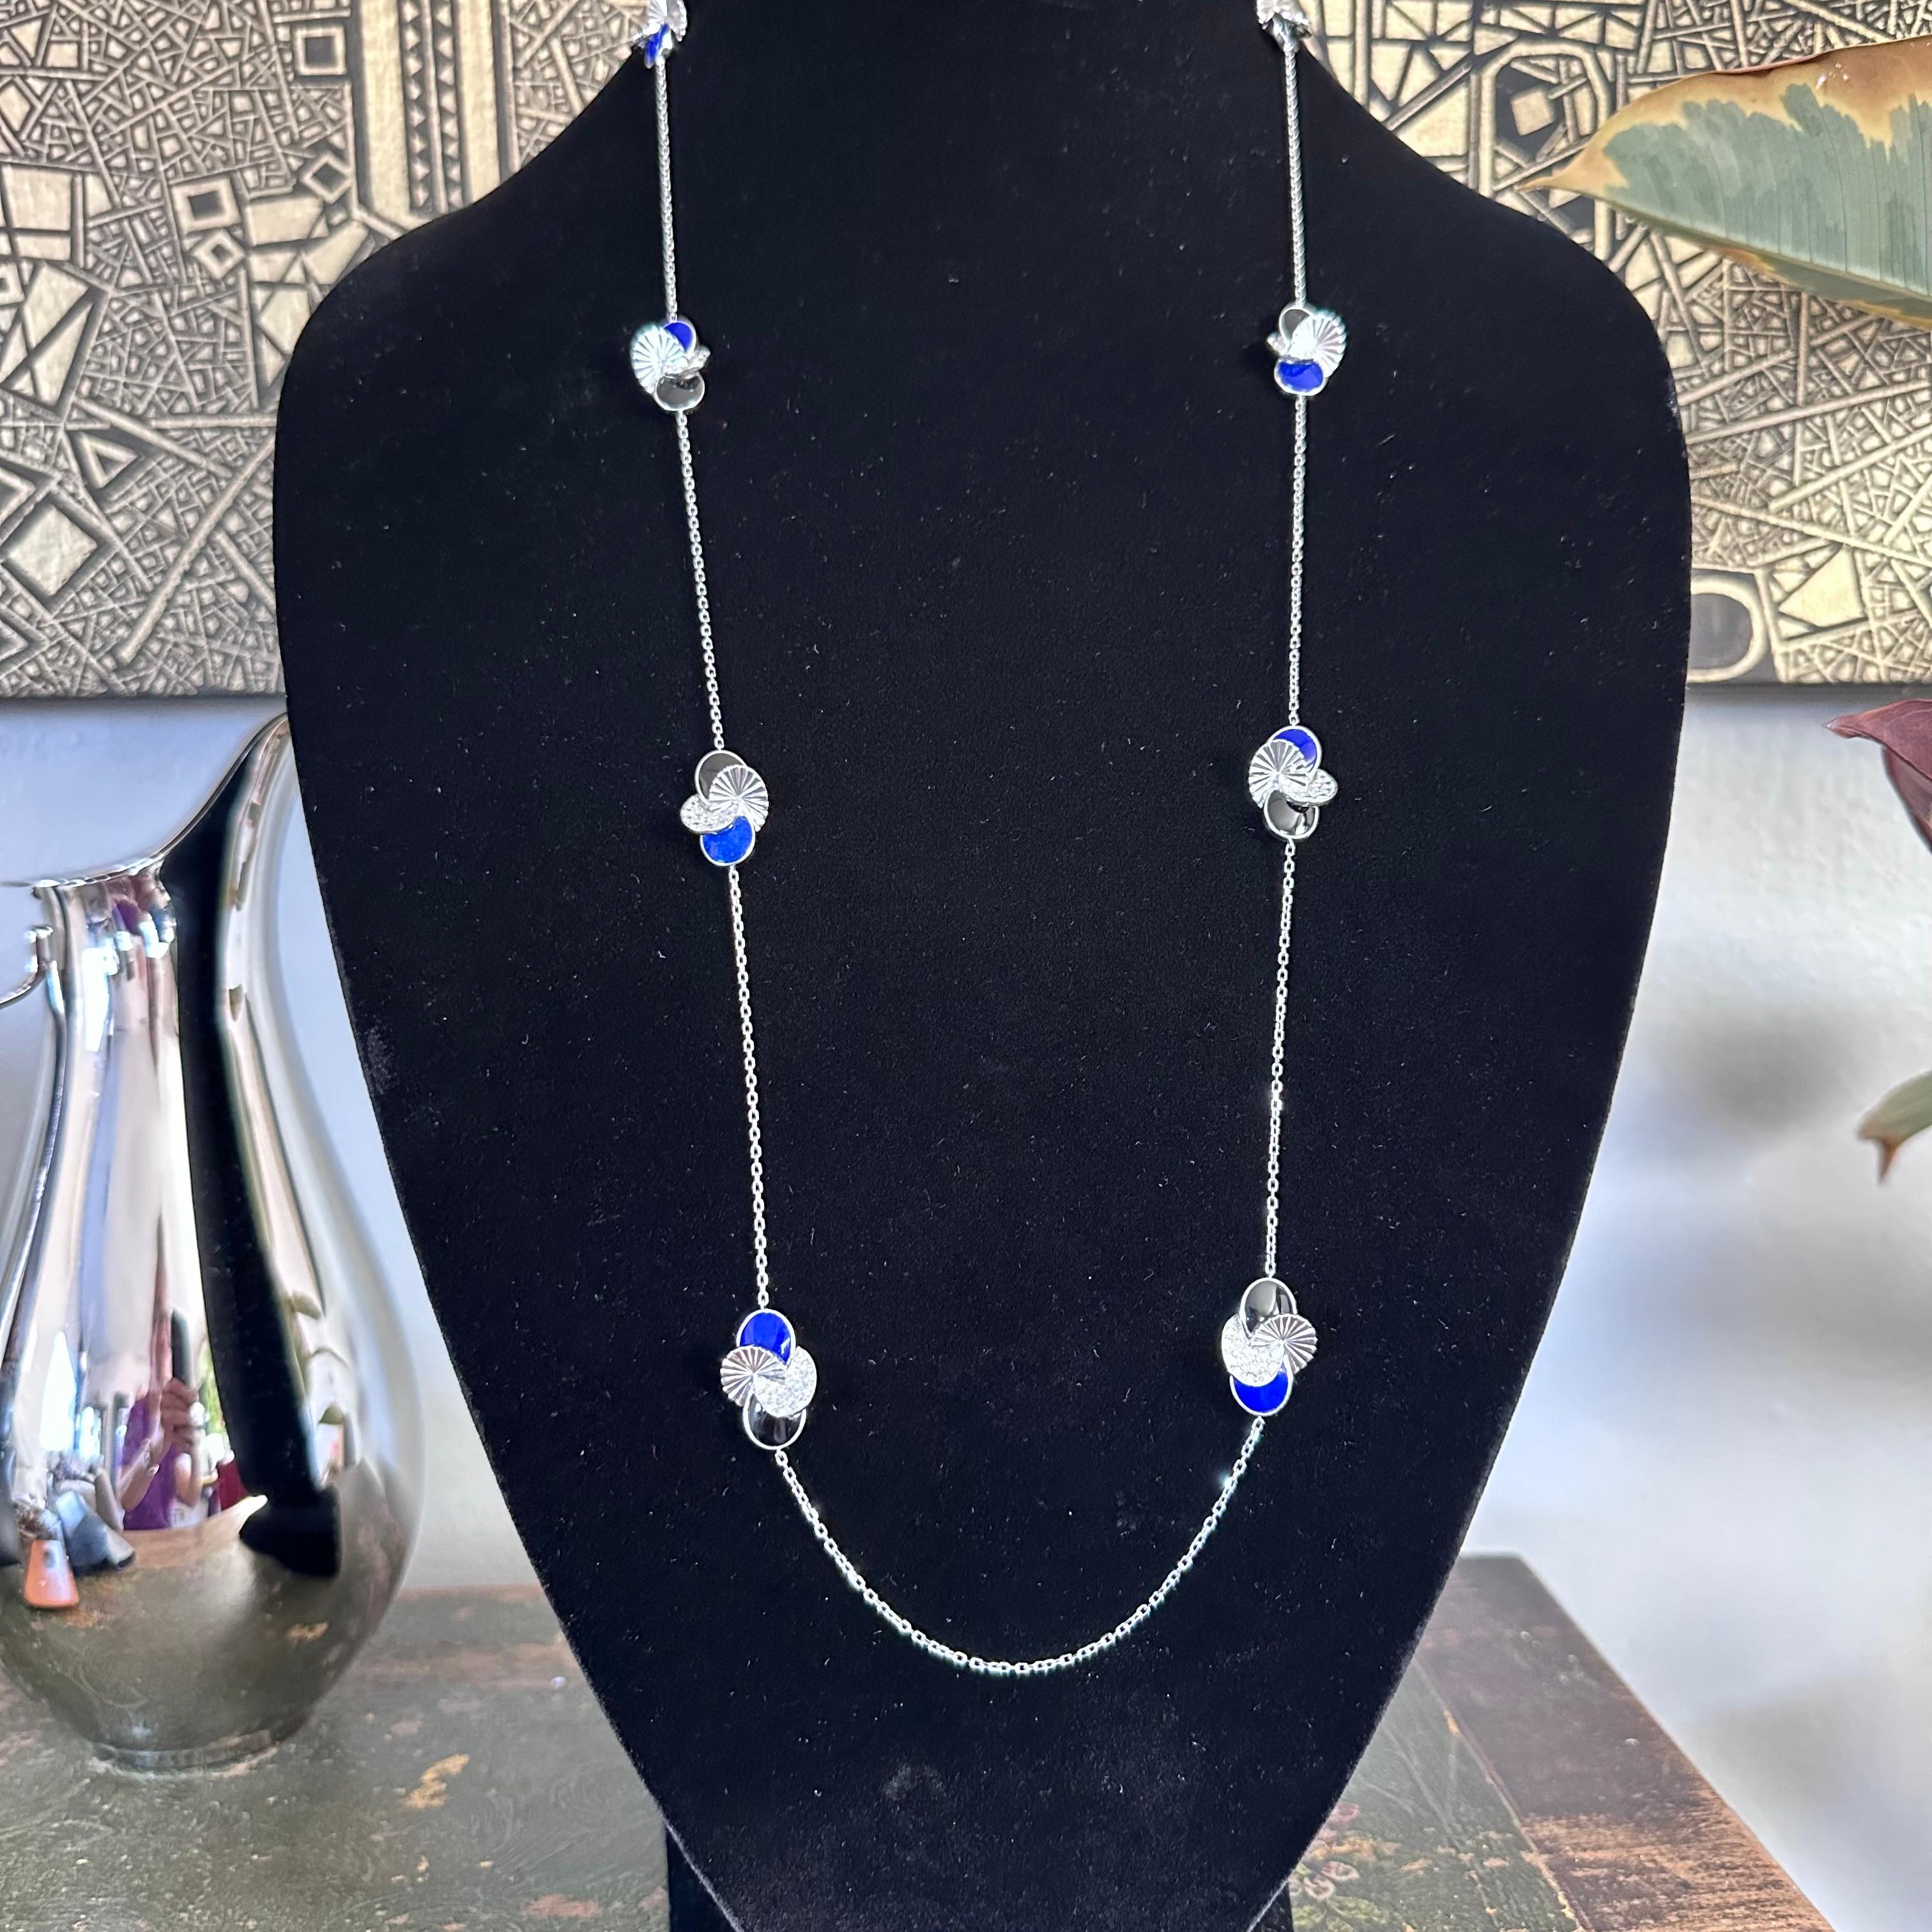 Cartier, Paris Nouvelle Collection Long White Gold Lapis Lazuli, Onyx and Diamonds 37 inch Necklace with eight stations of diamond, blue lapis and onyx. Stunning Pave set Diamonds, approximately 3 cts of Fine White D - E Color VVS Diamonds